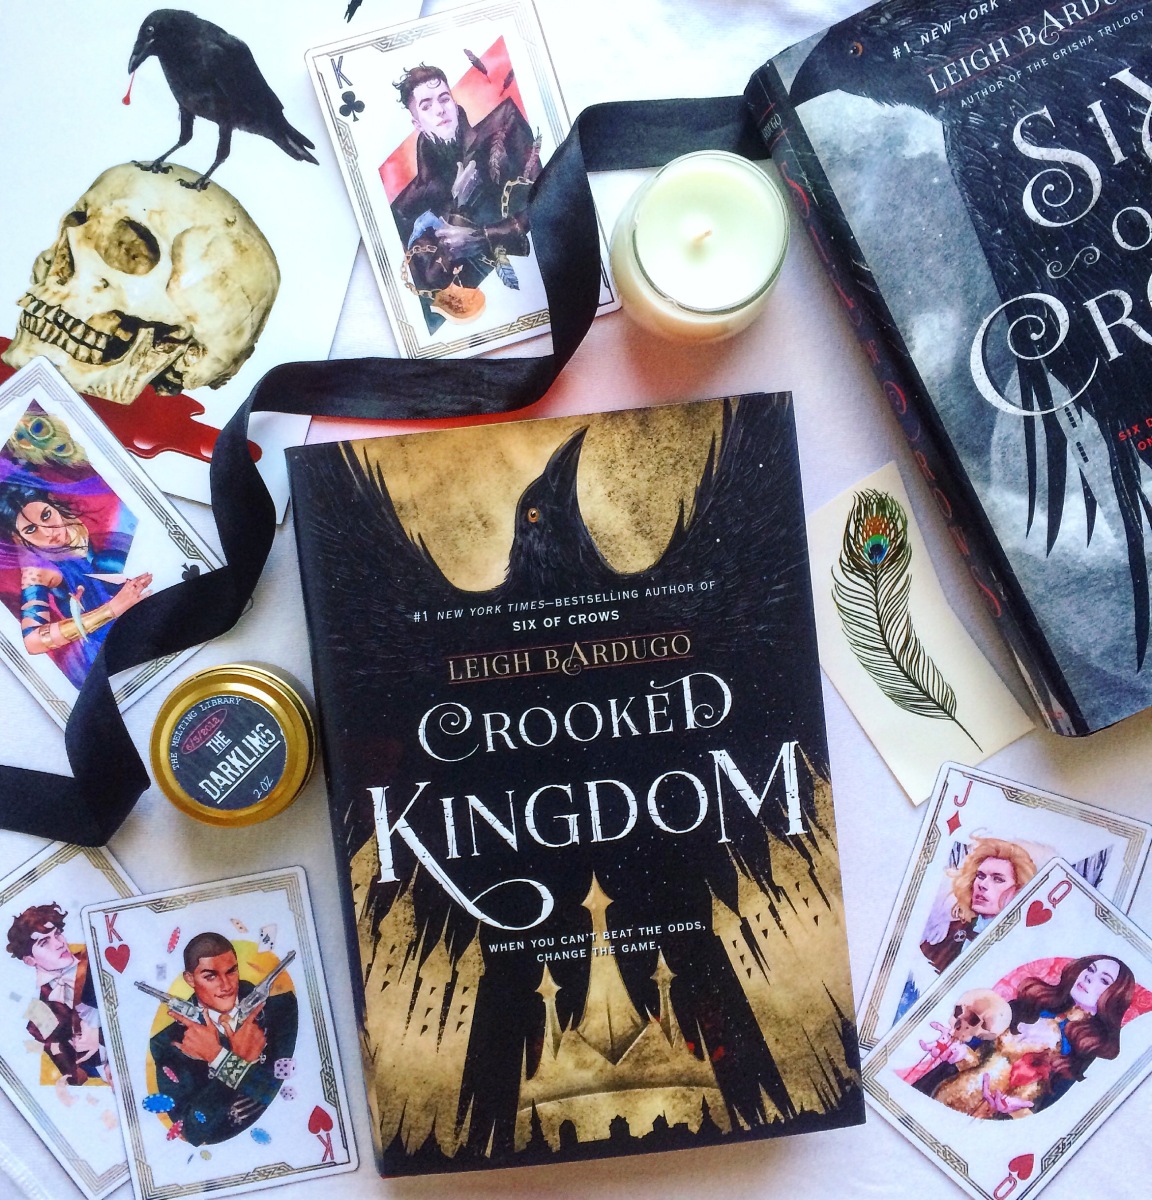 READING FOR SANITY BOOK REVIEWS: The Six of Crows Duology (including Six of  Crows, #1 and The Crooked Kingdom, #2)